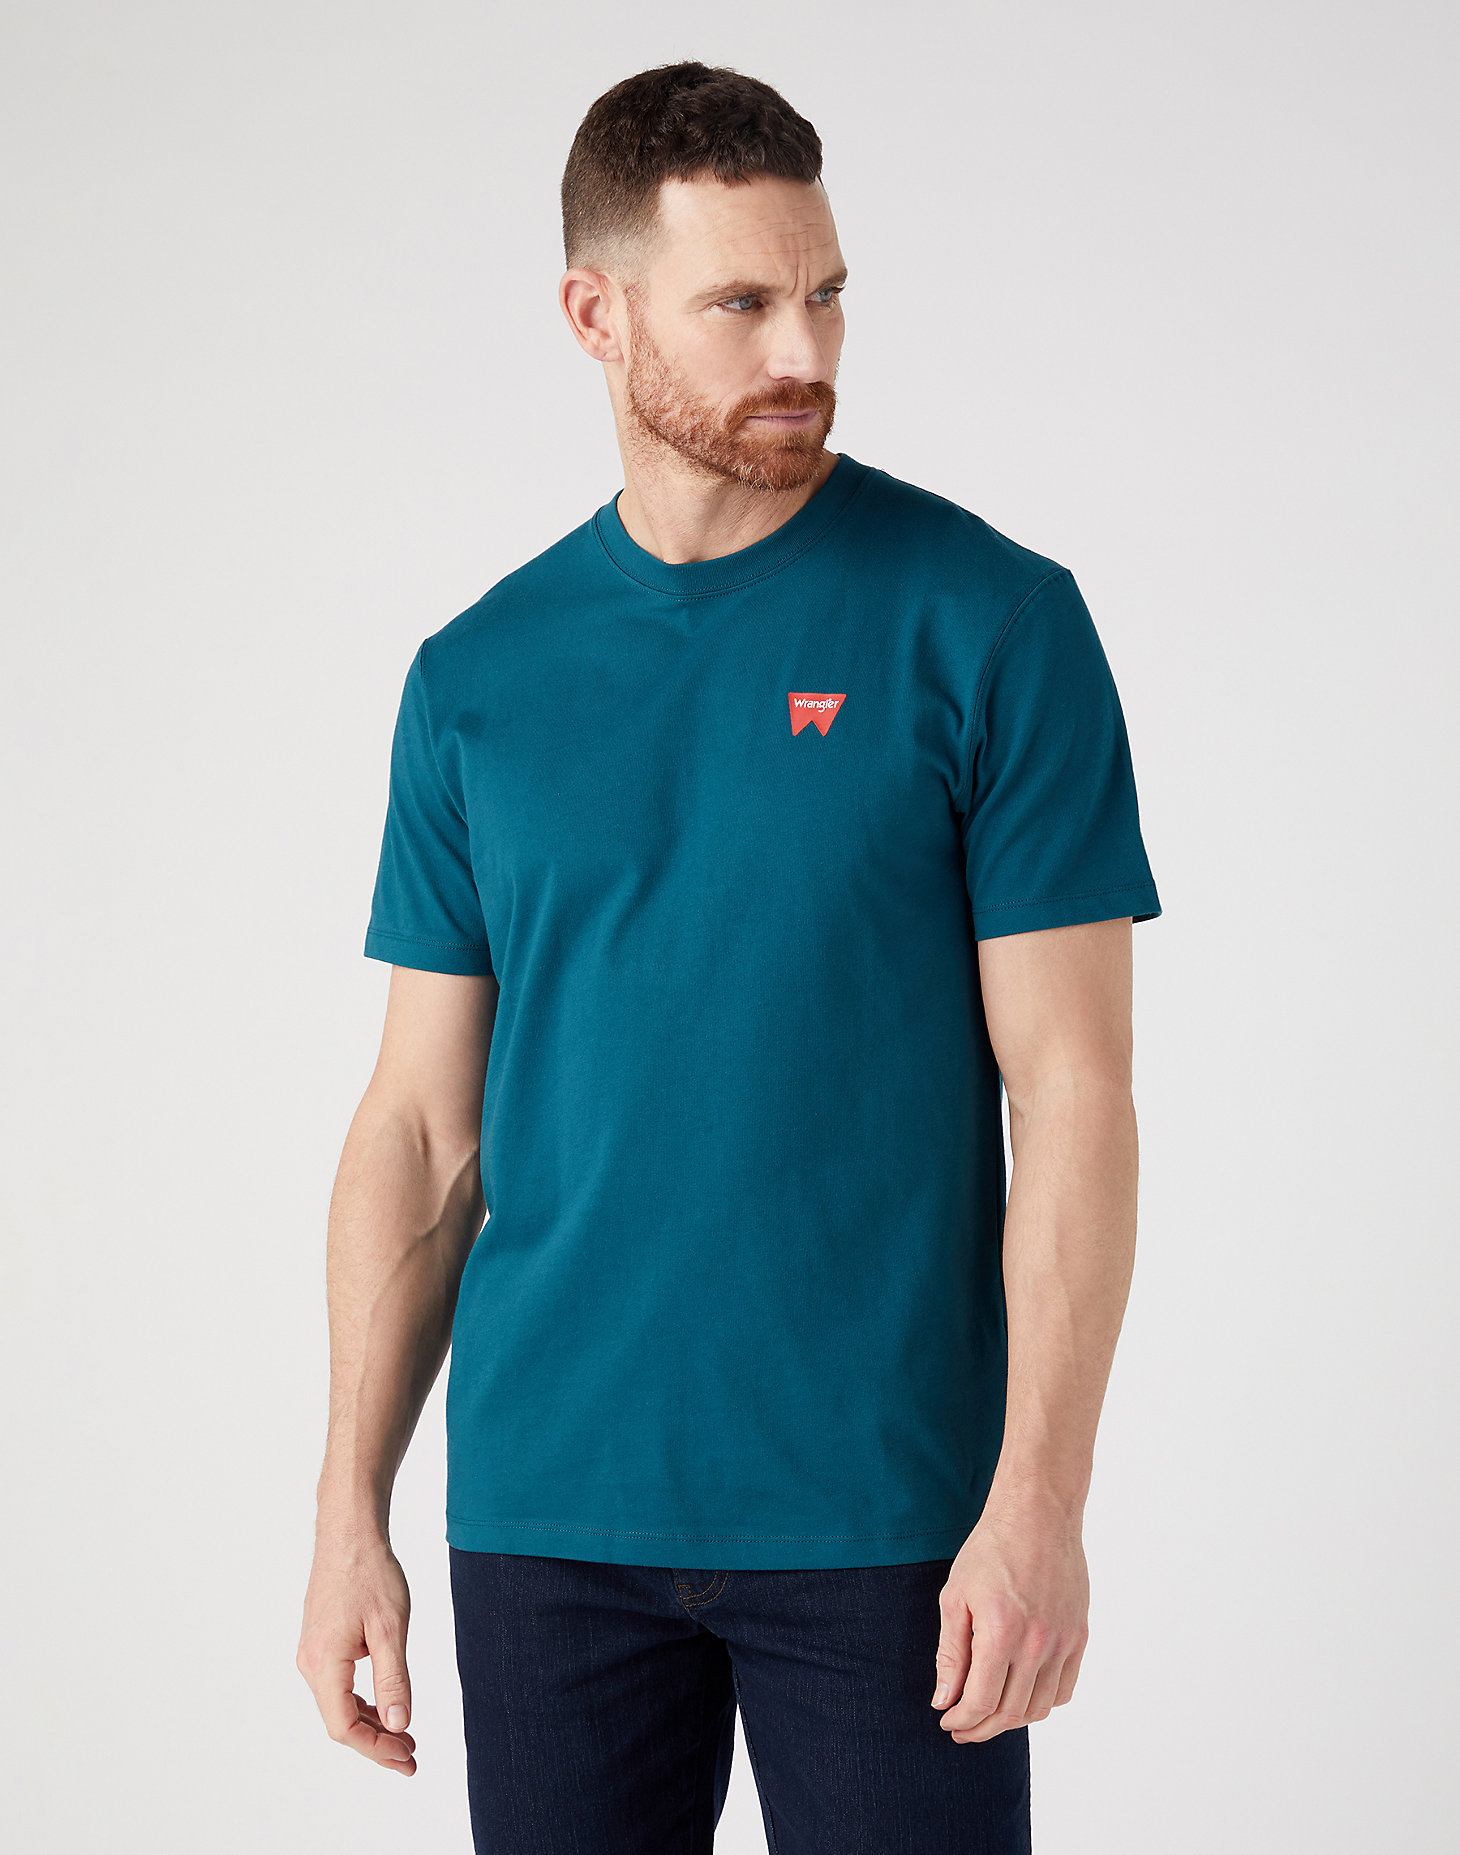 Sign Off Tee in Deep Teal Green main view